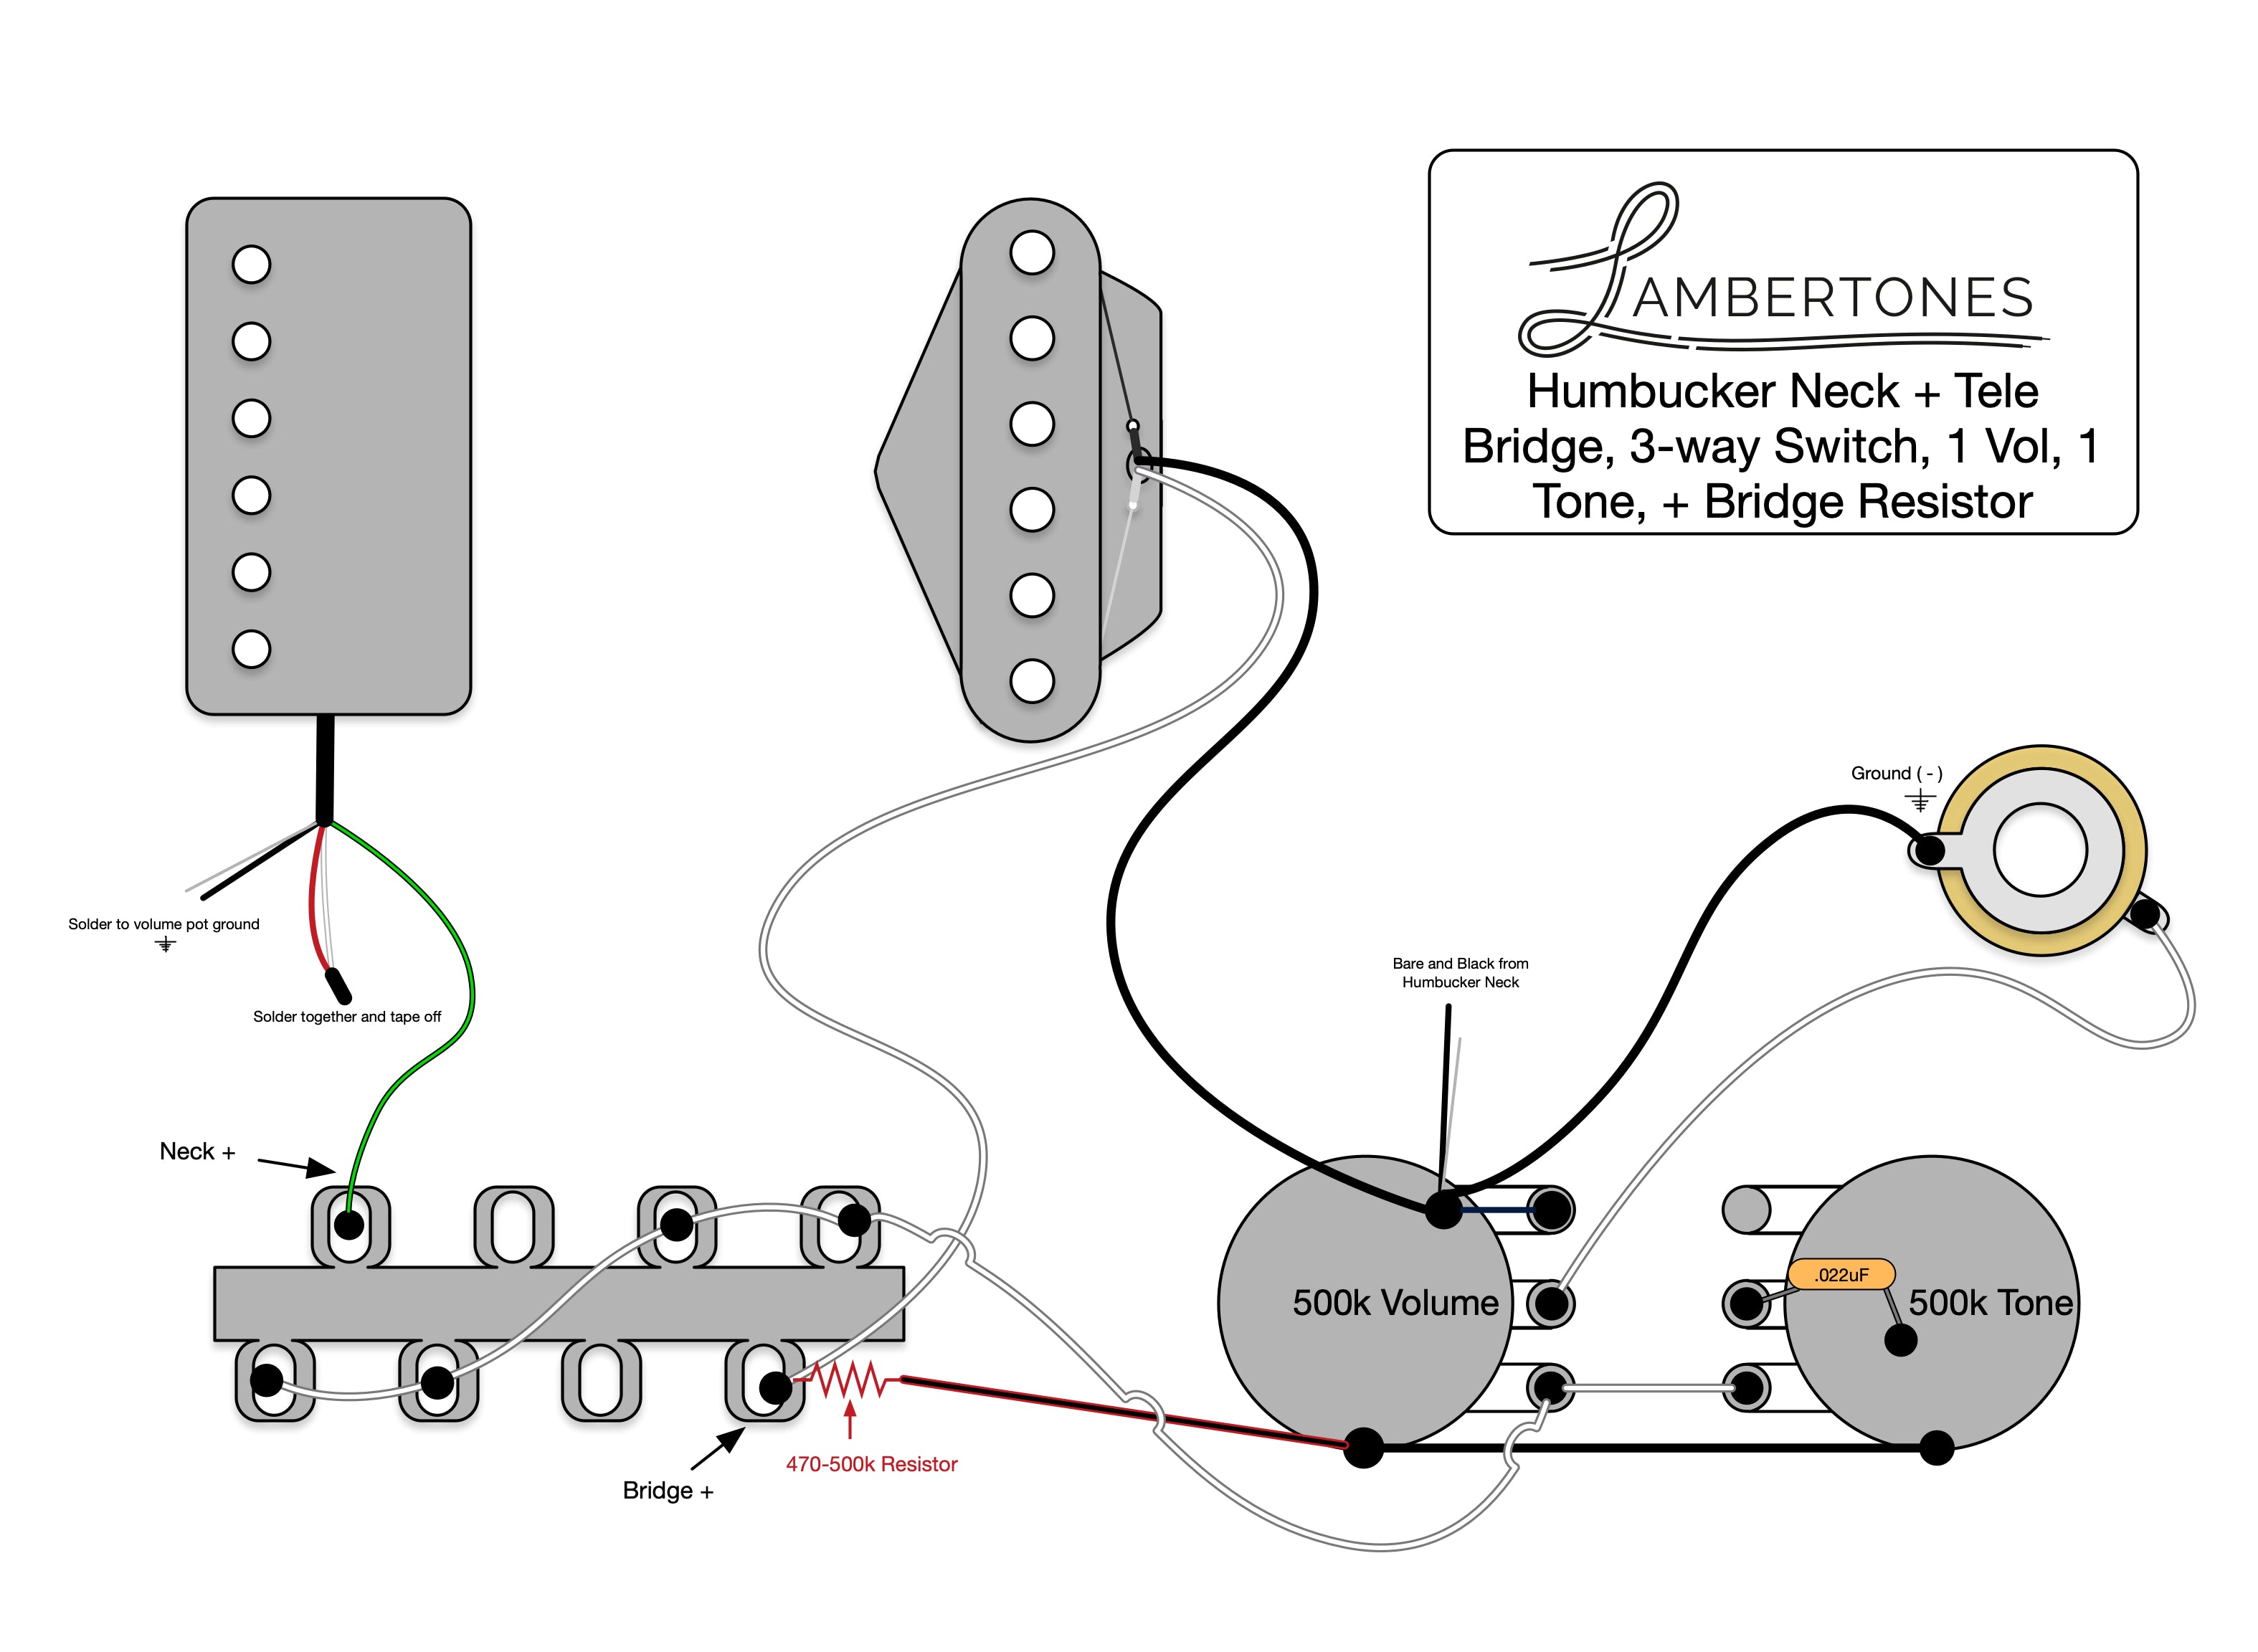 1 Humbucker 1 Volume Wiring : 2 P90s 1 Tone 1 Vol 3 Way Switch How Do I Do This Ultimate Guitar